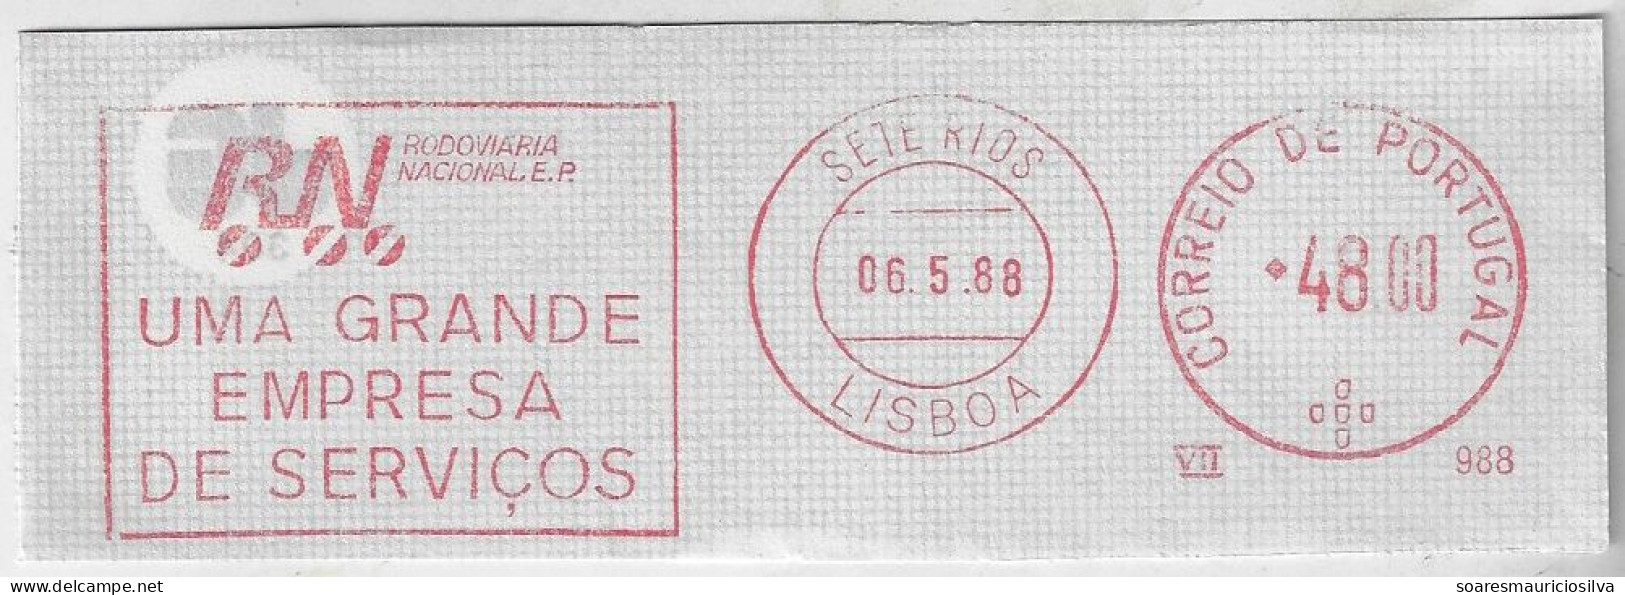 Portugal 1988 Cover Fragment Meter Stamp Francotyp Slogan National Road Co. From Lisbon Sete Rios Agency Transport Bus - Busses